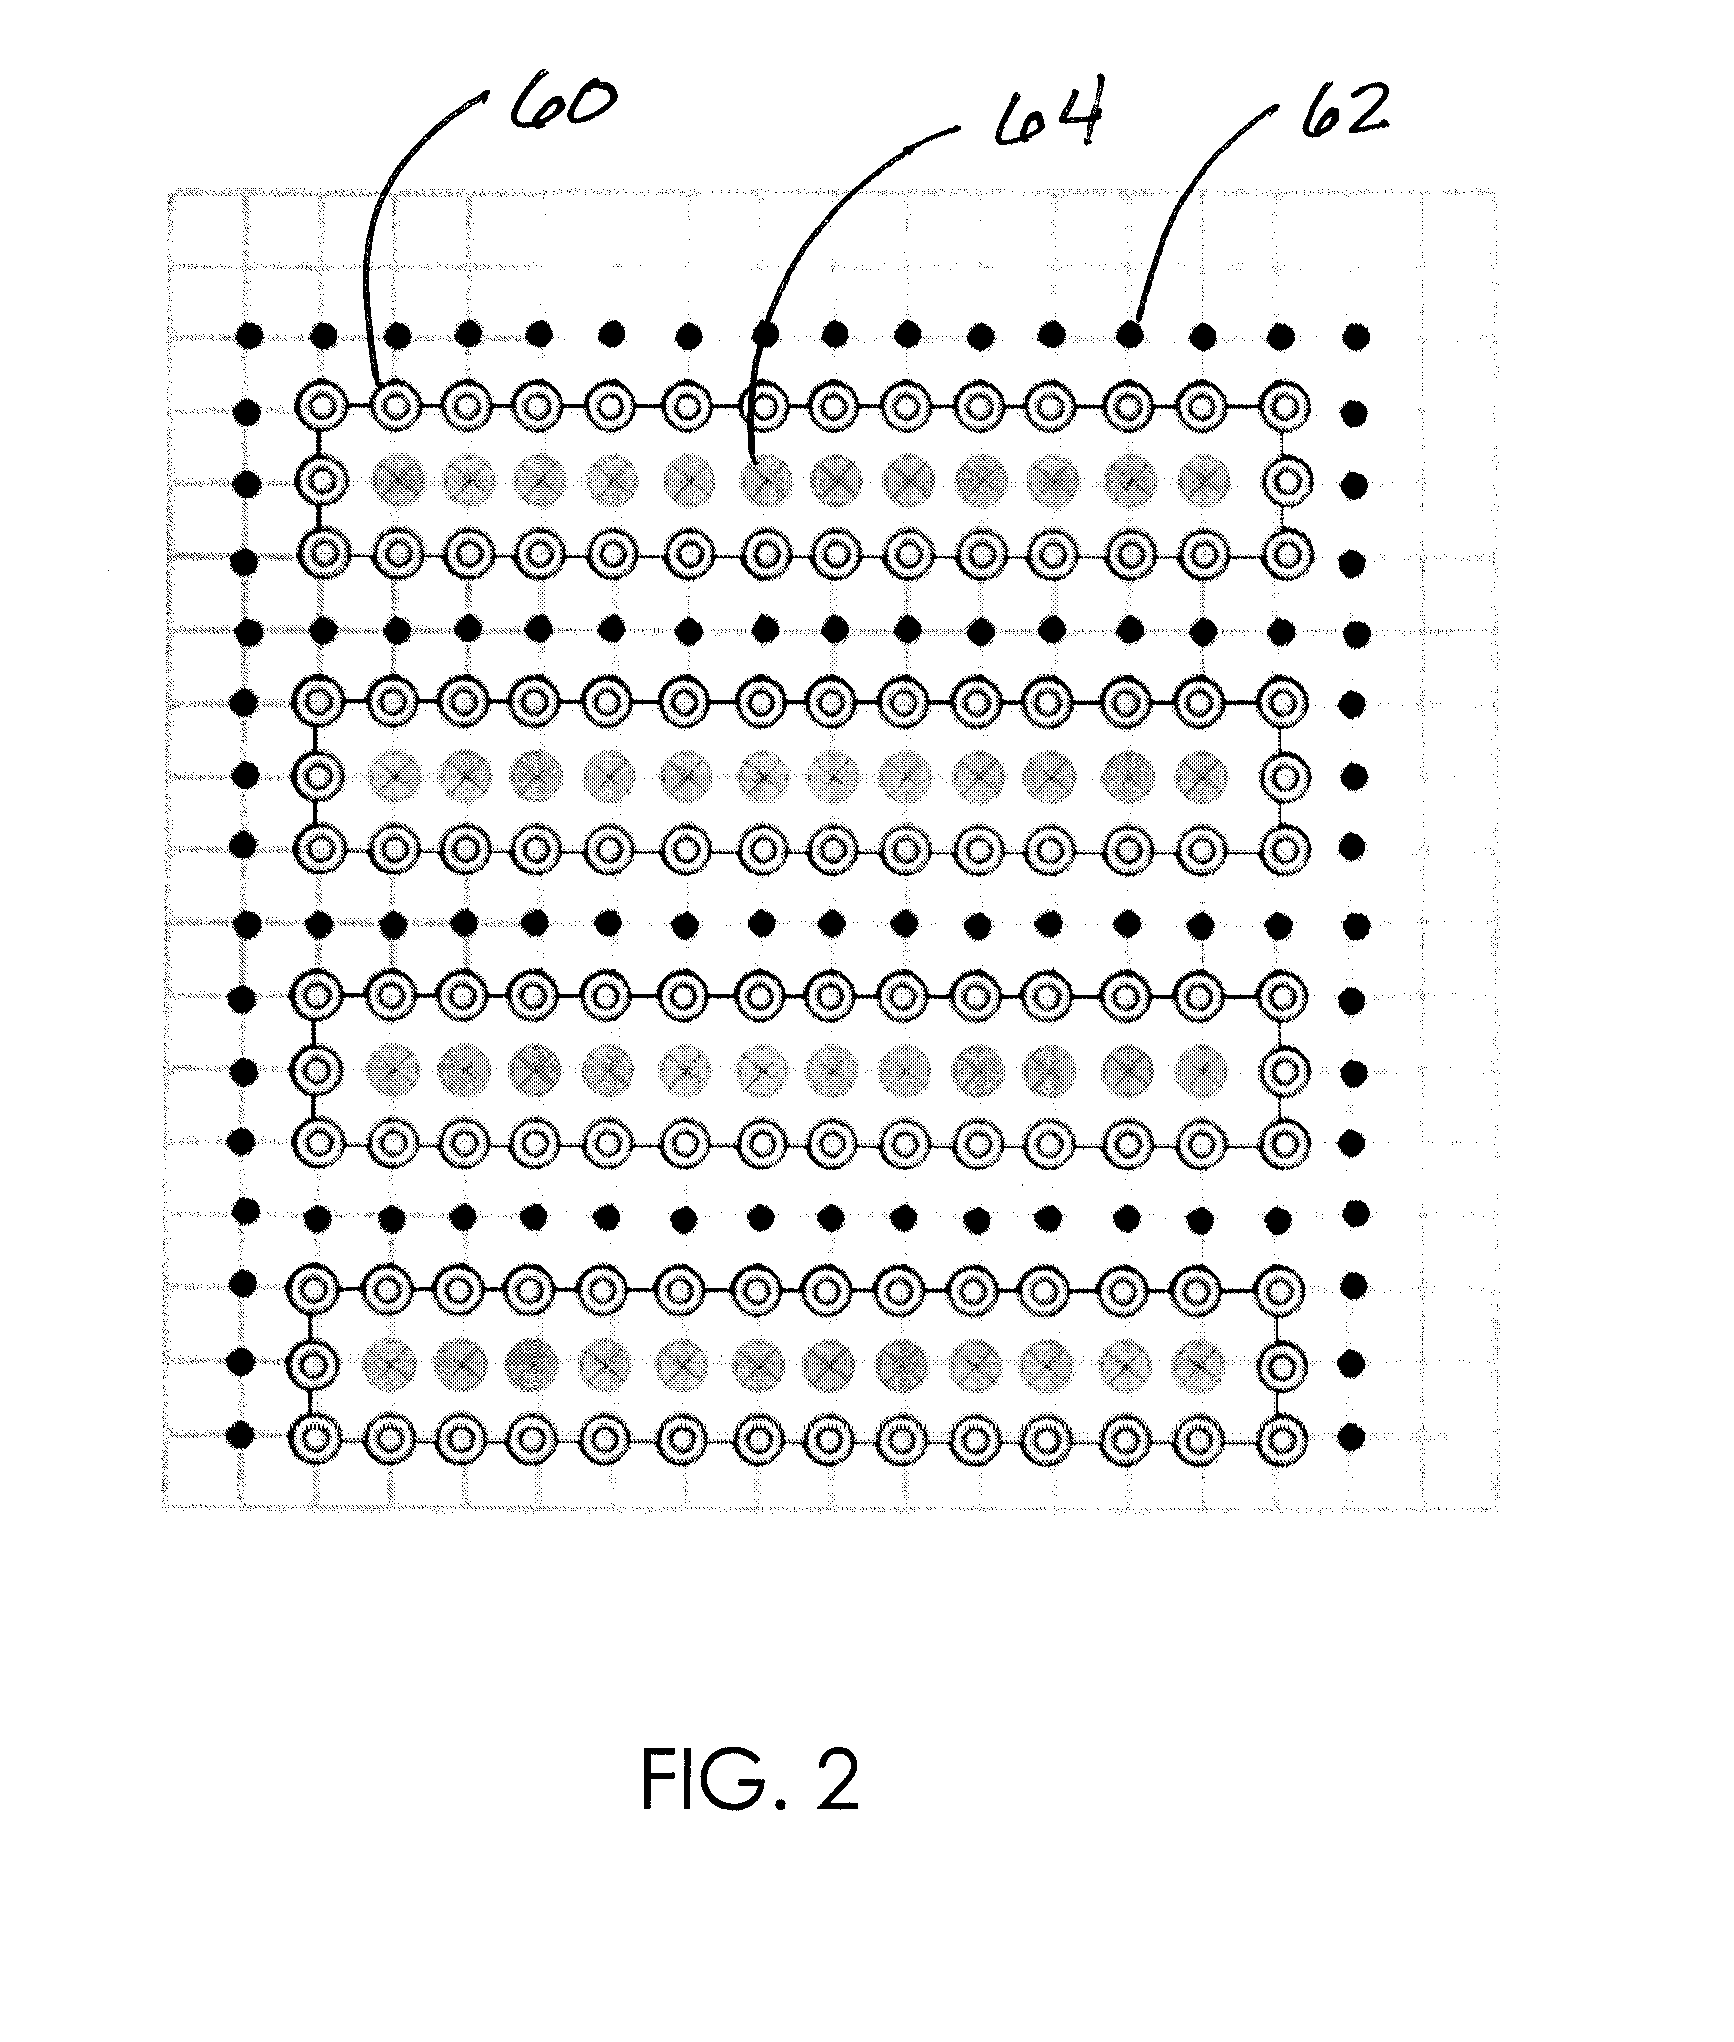 System and Method for Real-Time Full-Service Shopping